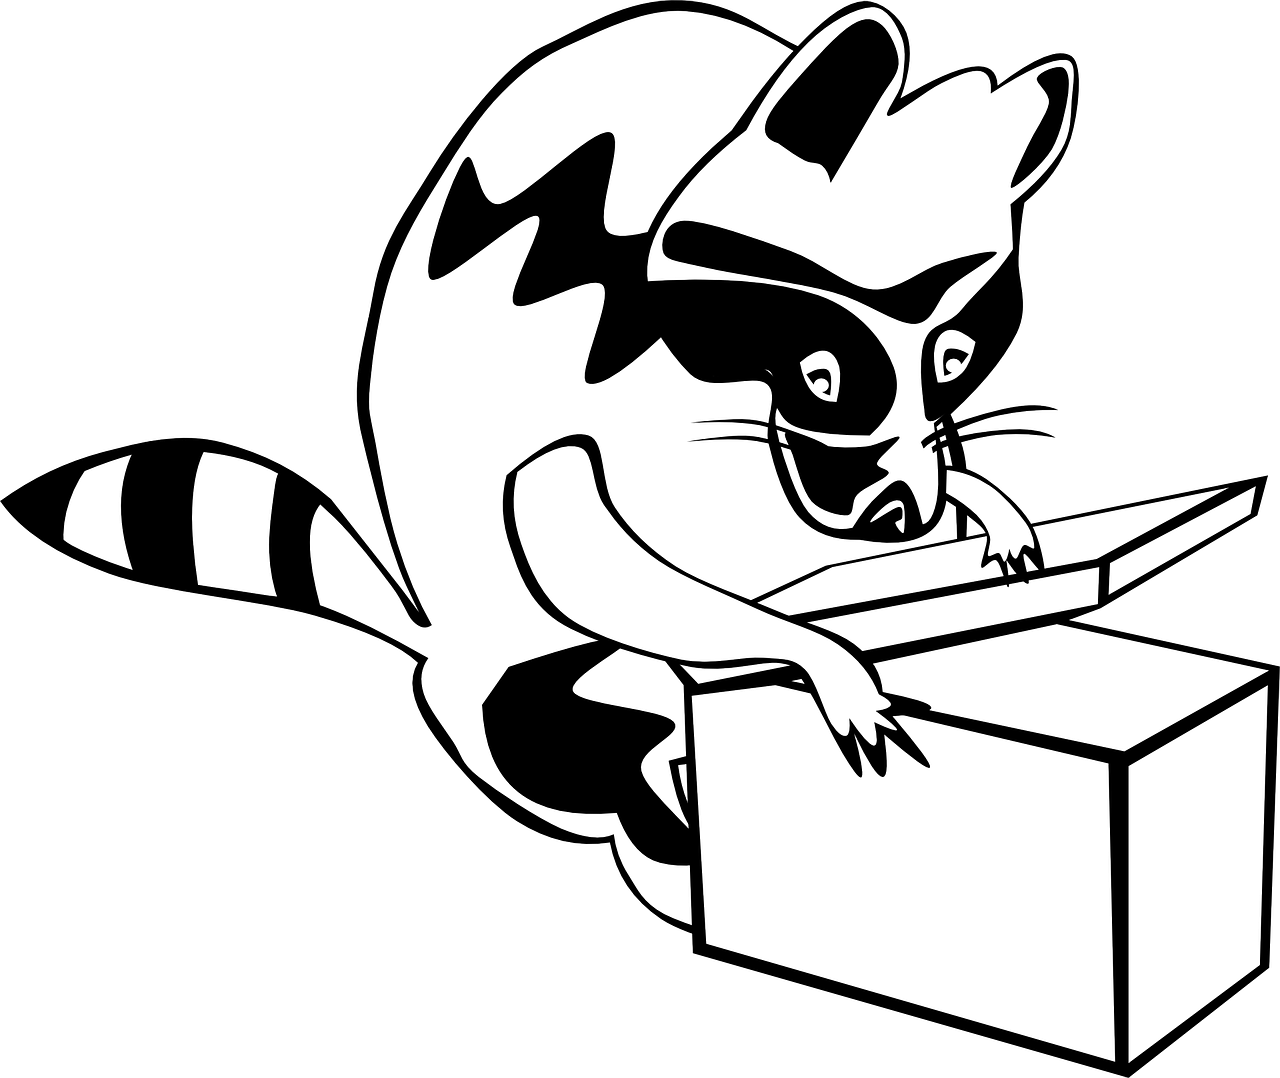 raccoon,box,animal,mammal,opening,free vector graphics,free pictures, free photos, free images, royalty free, free illustrations, public domain